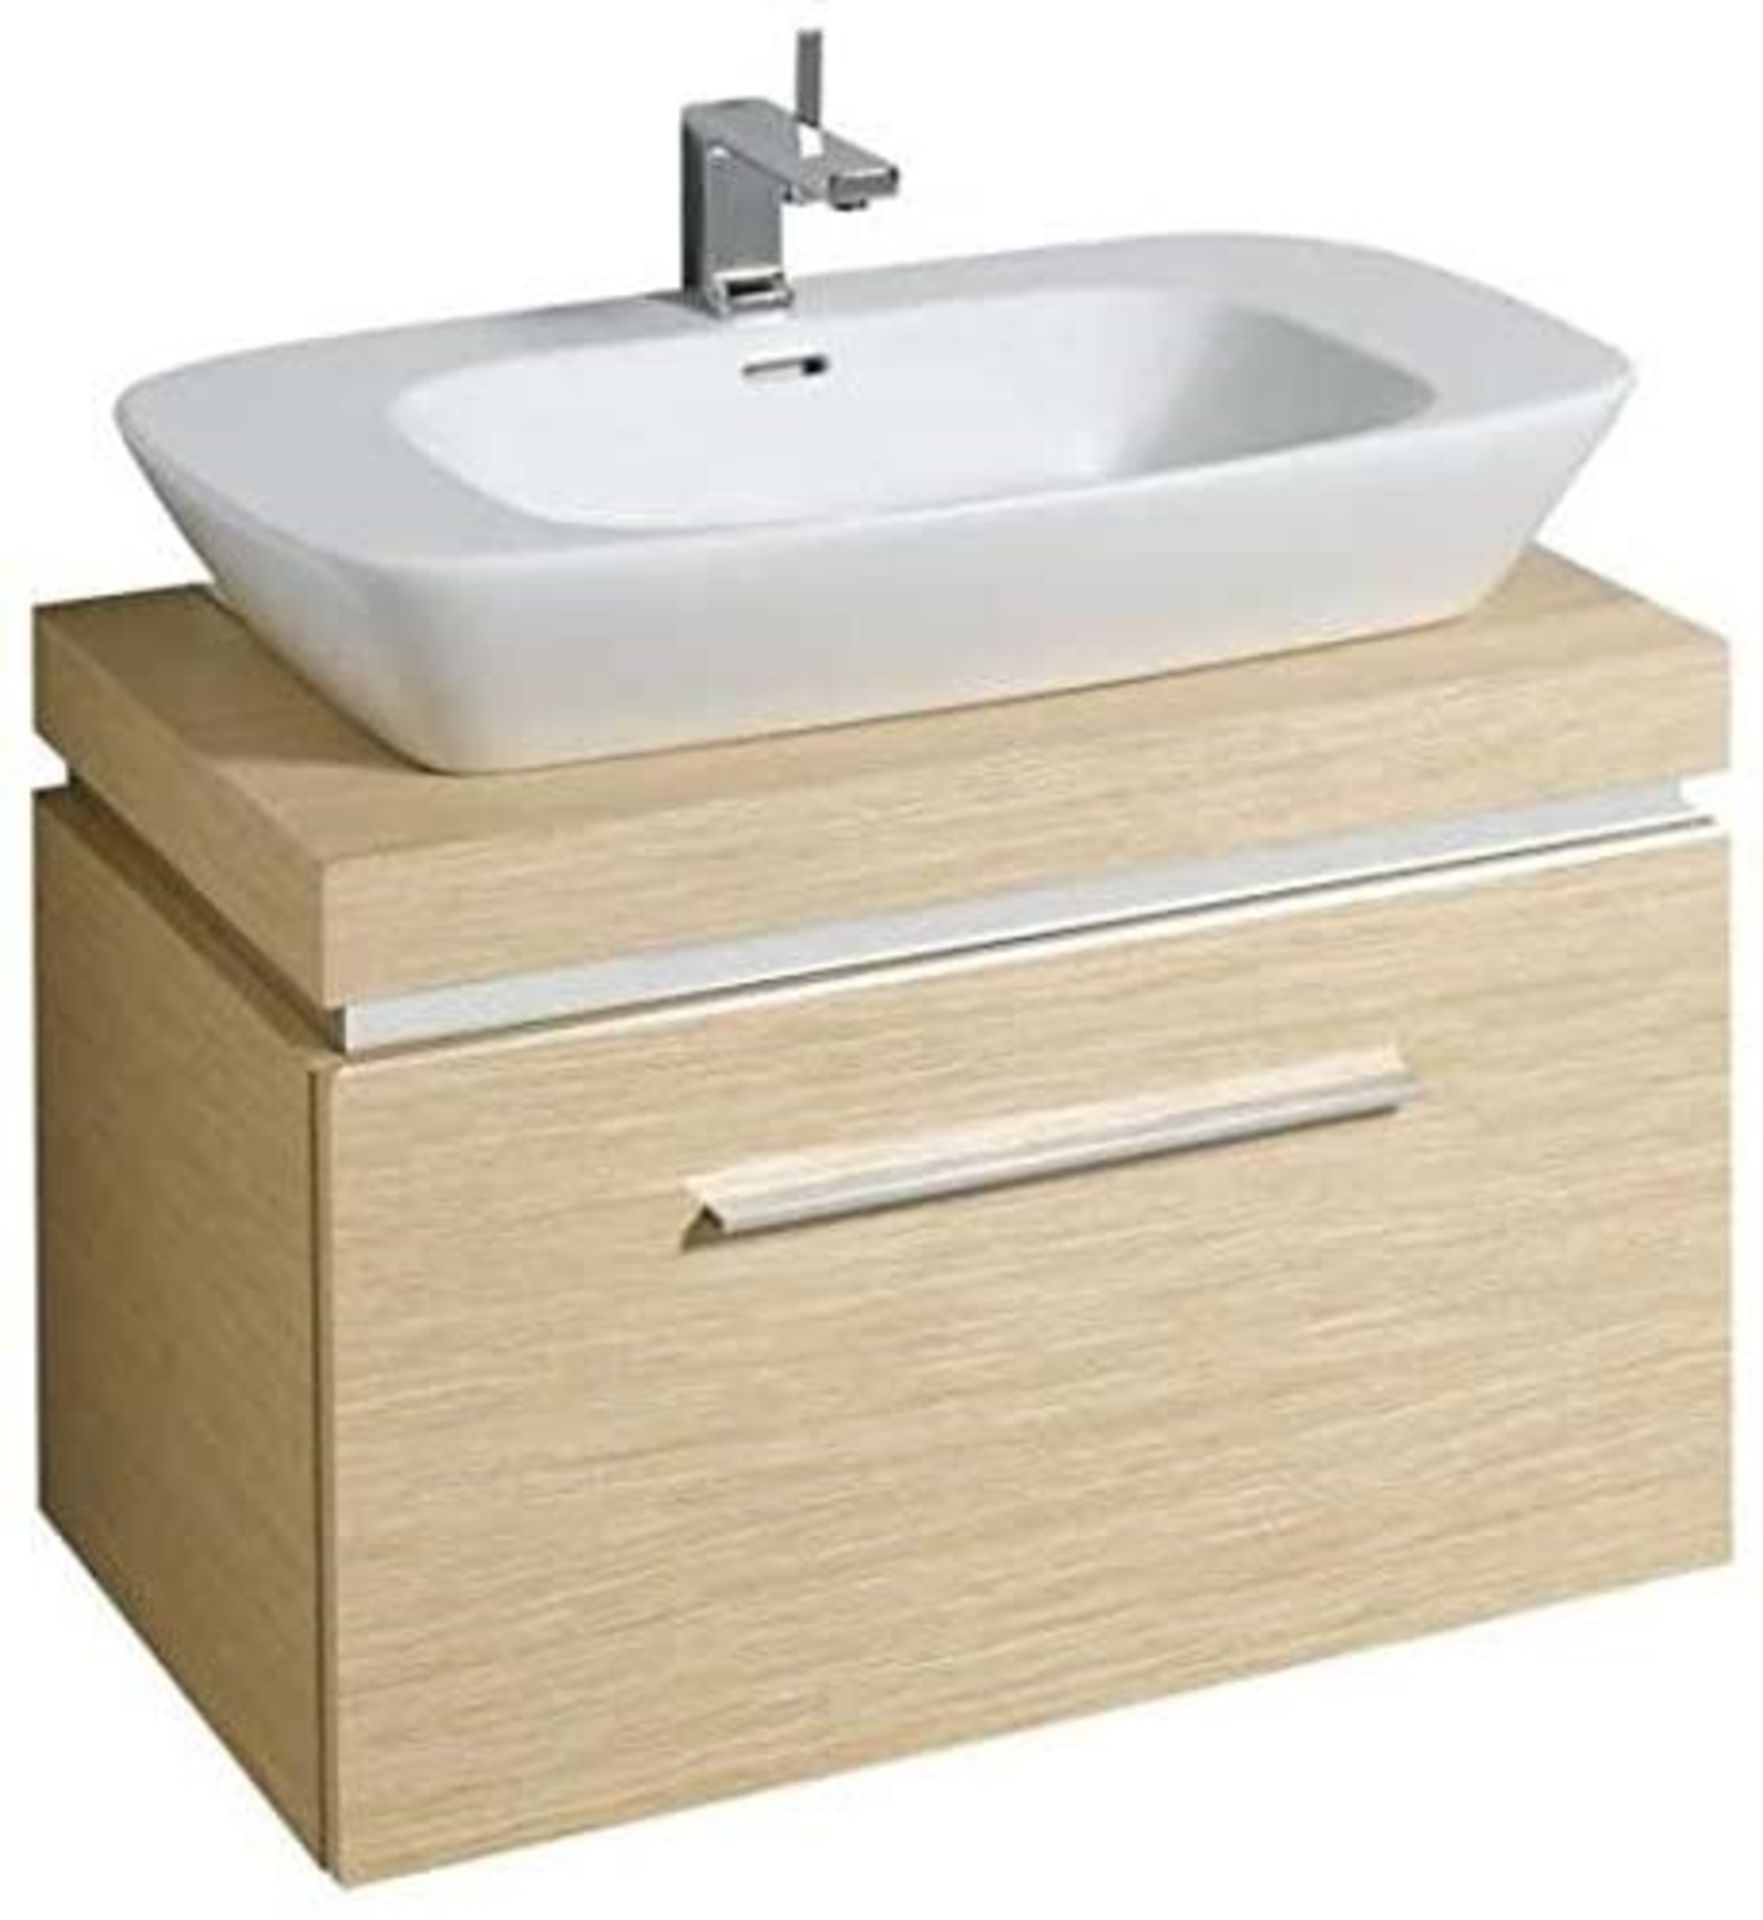 NEW (TL34) Keramag 800mm Oak White Vanity Unit.RRP £1,185.99.Comes complete with basin. The S...